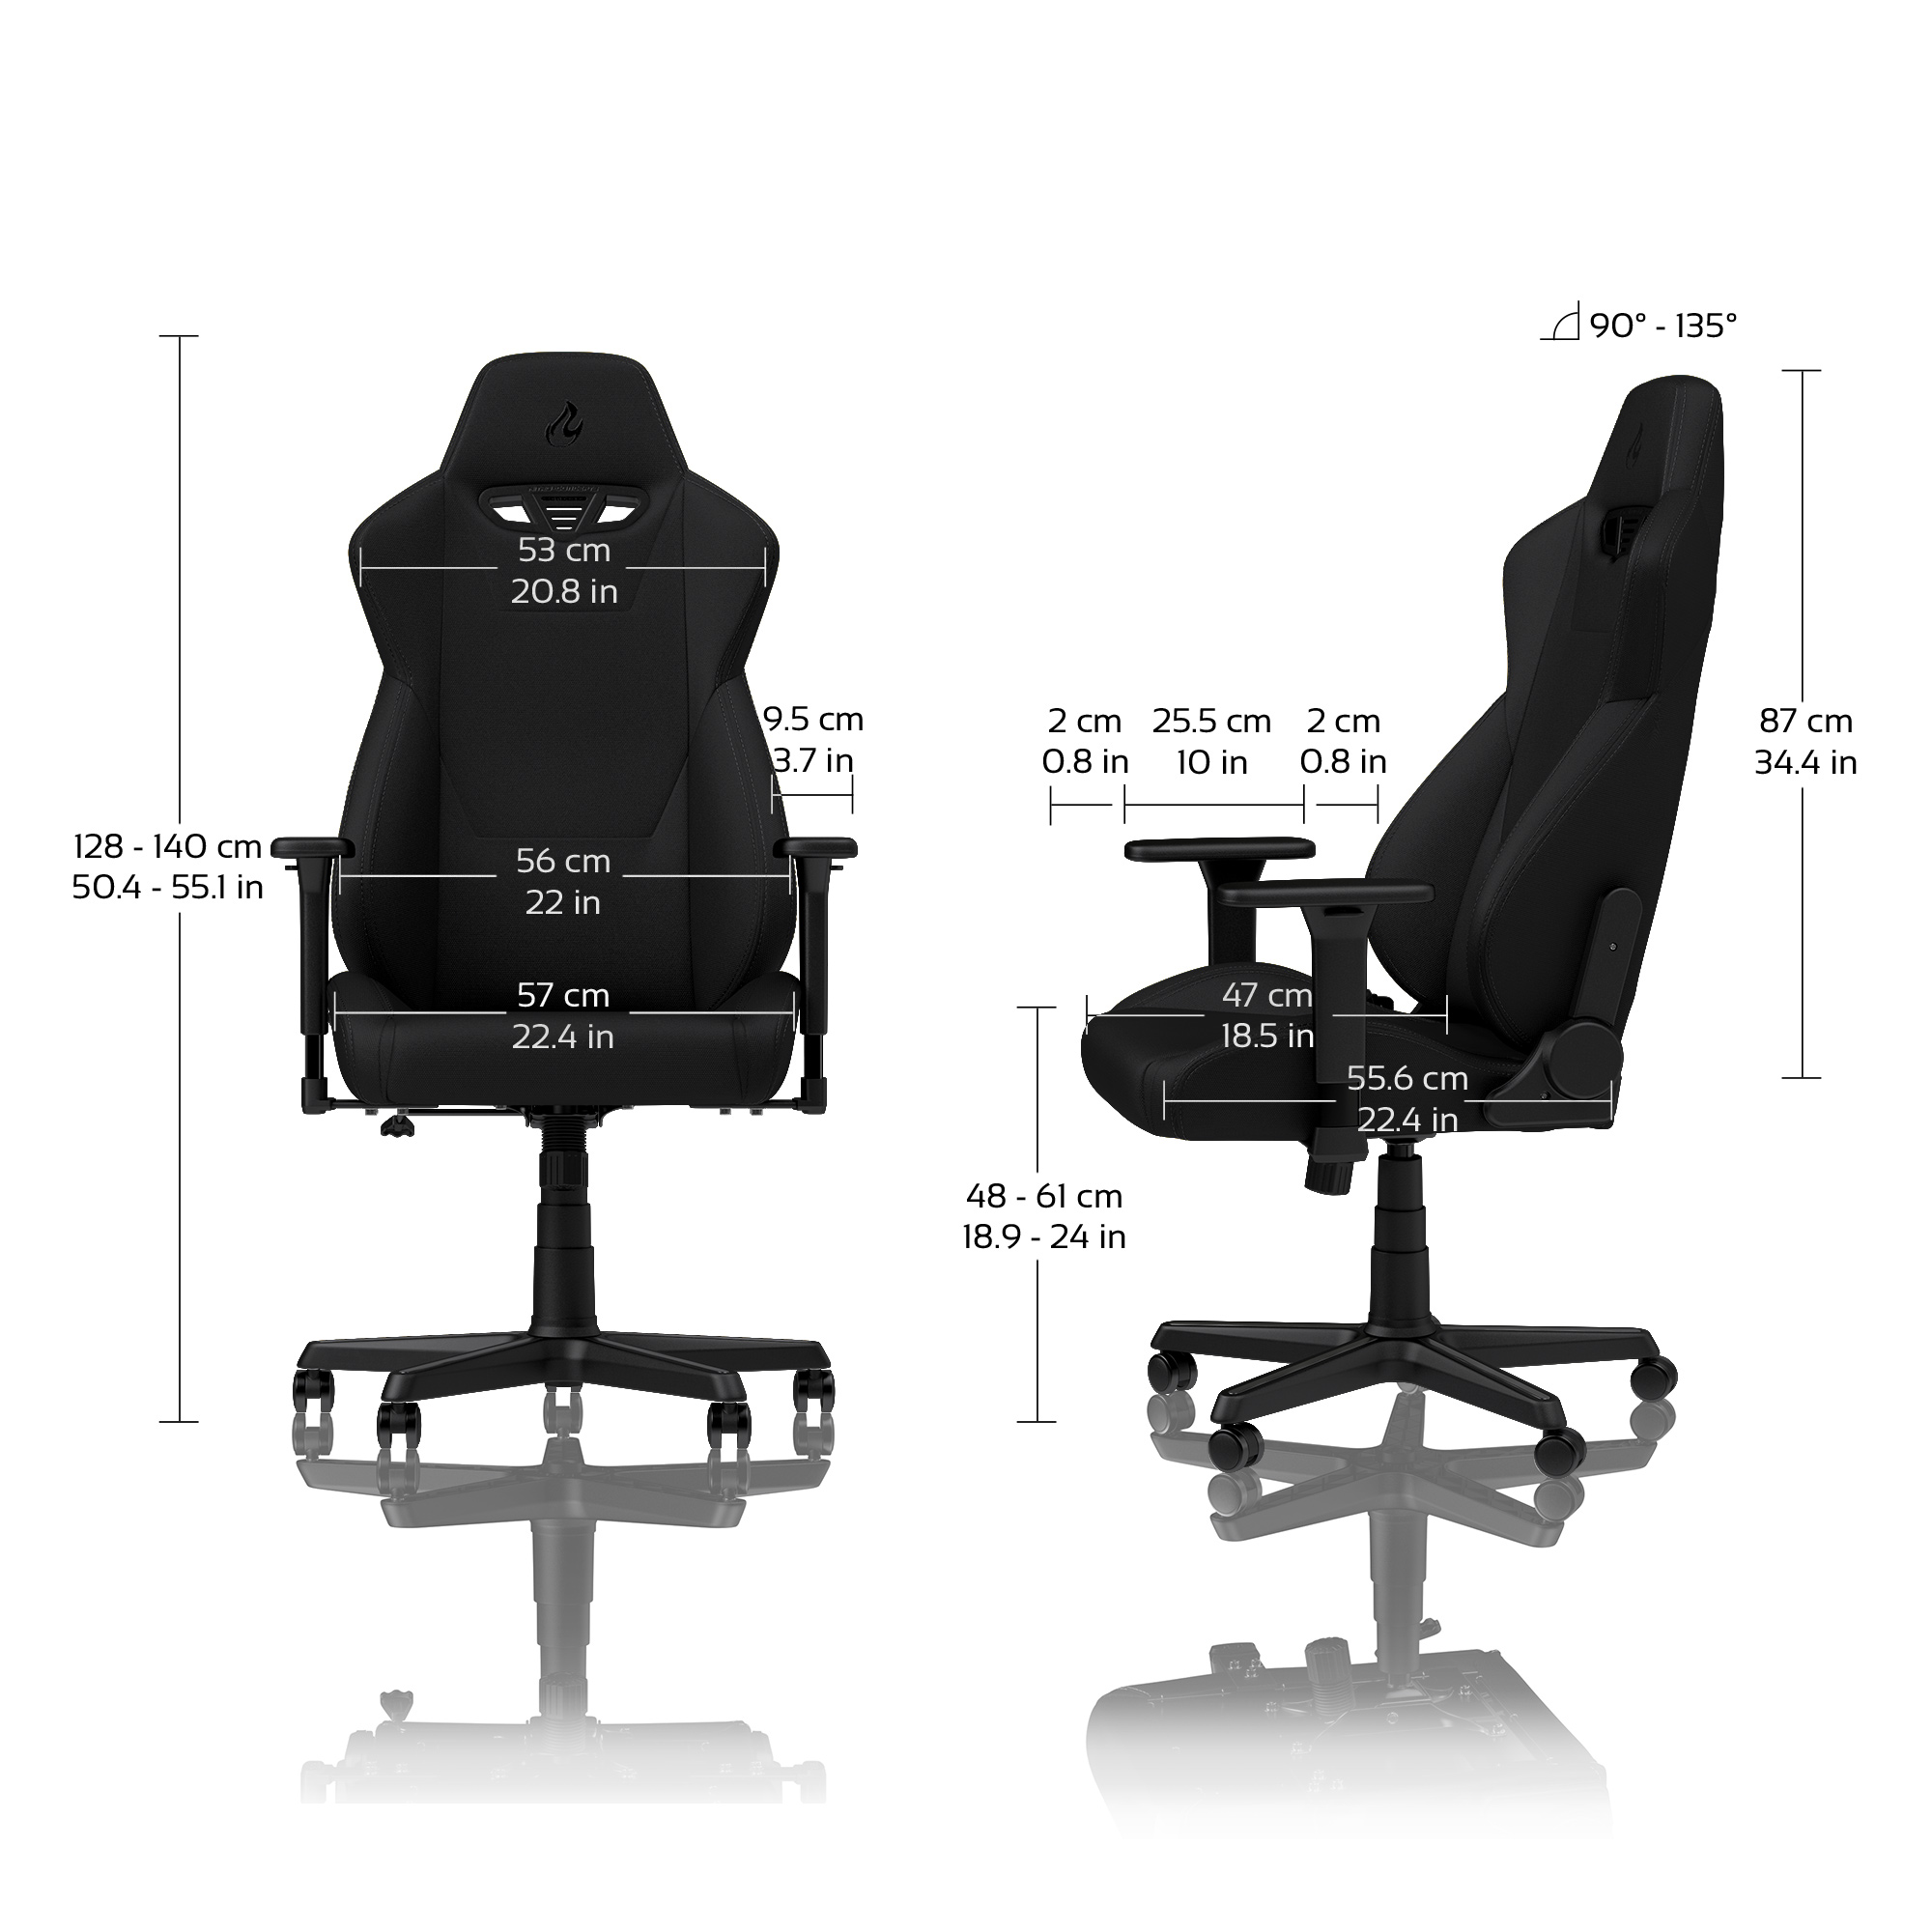 Nitro Concepts - Nitro Concepts S300 Fabric Gaming Chair - Stealth Black